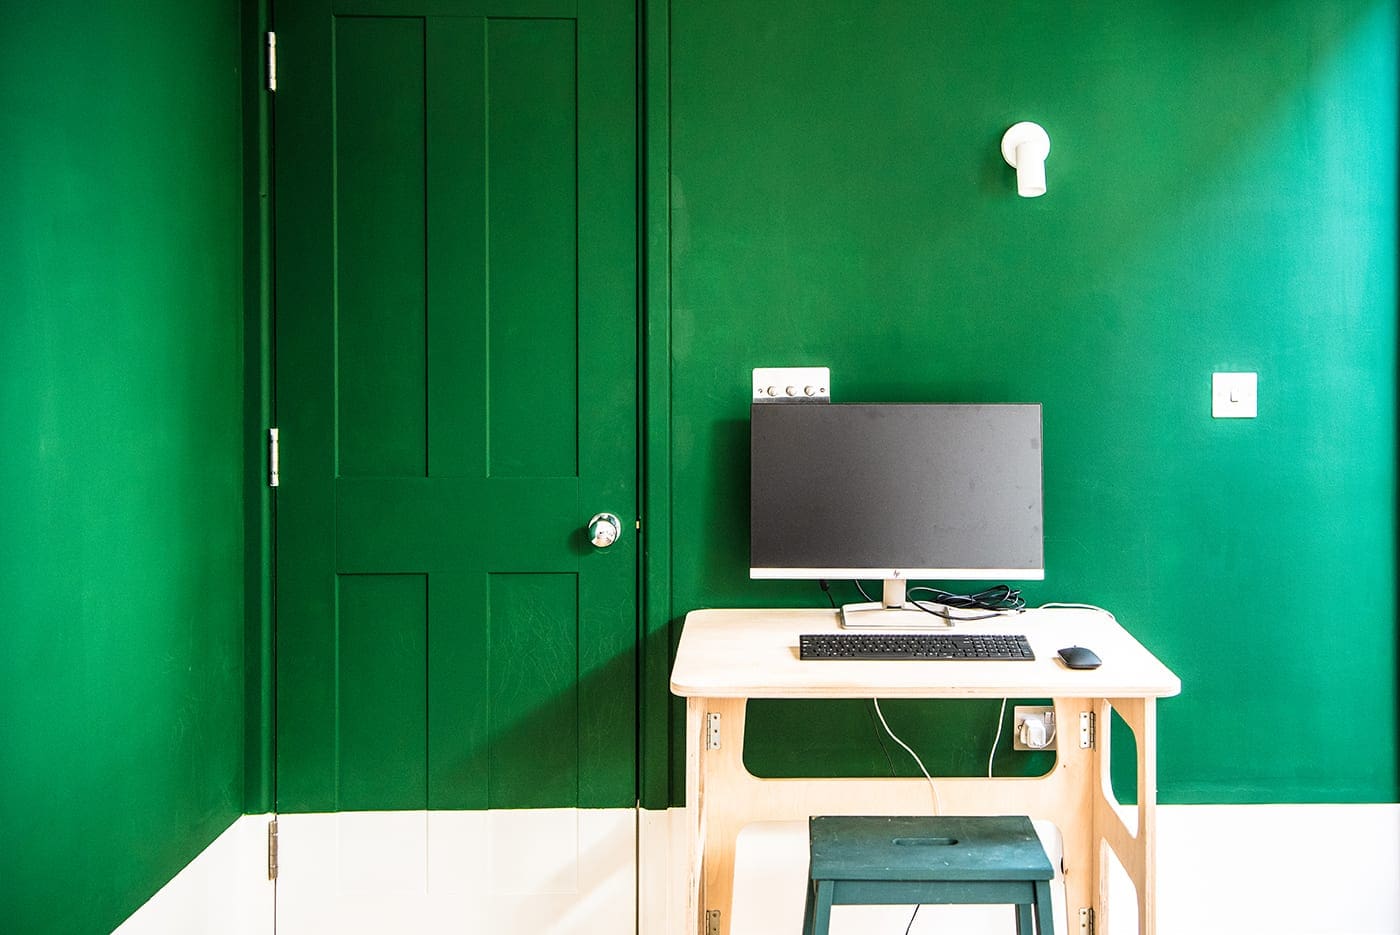 Desk against green and white wall